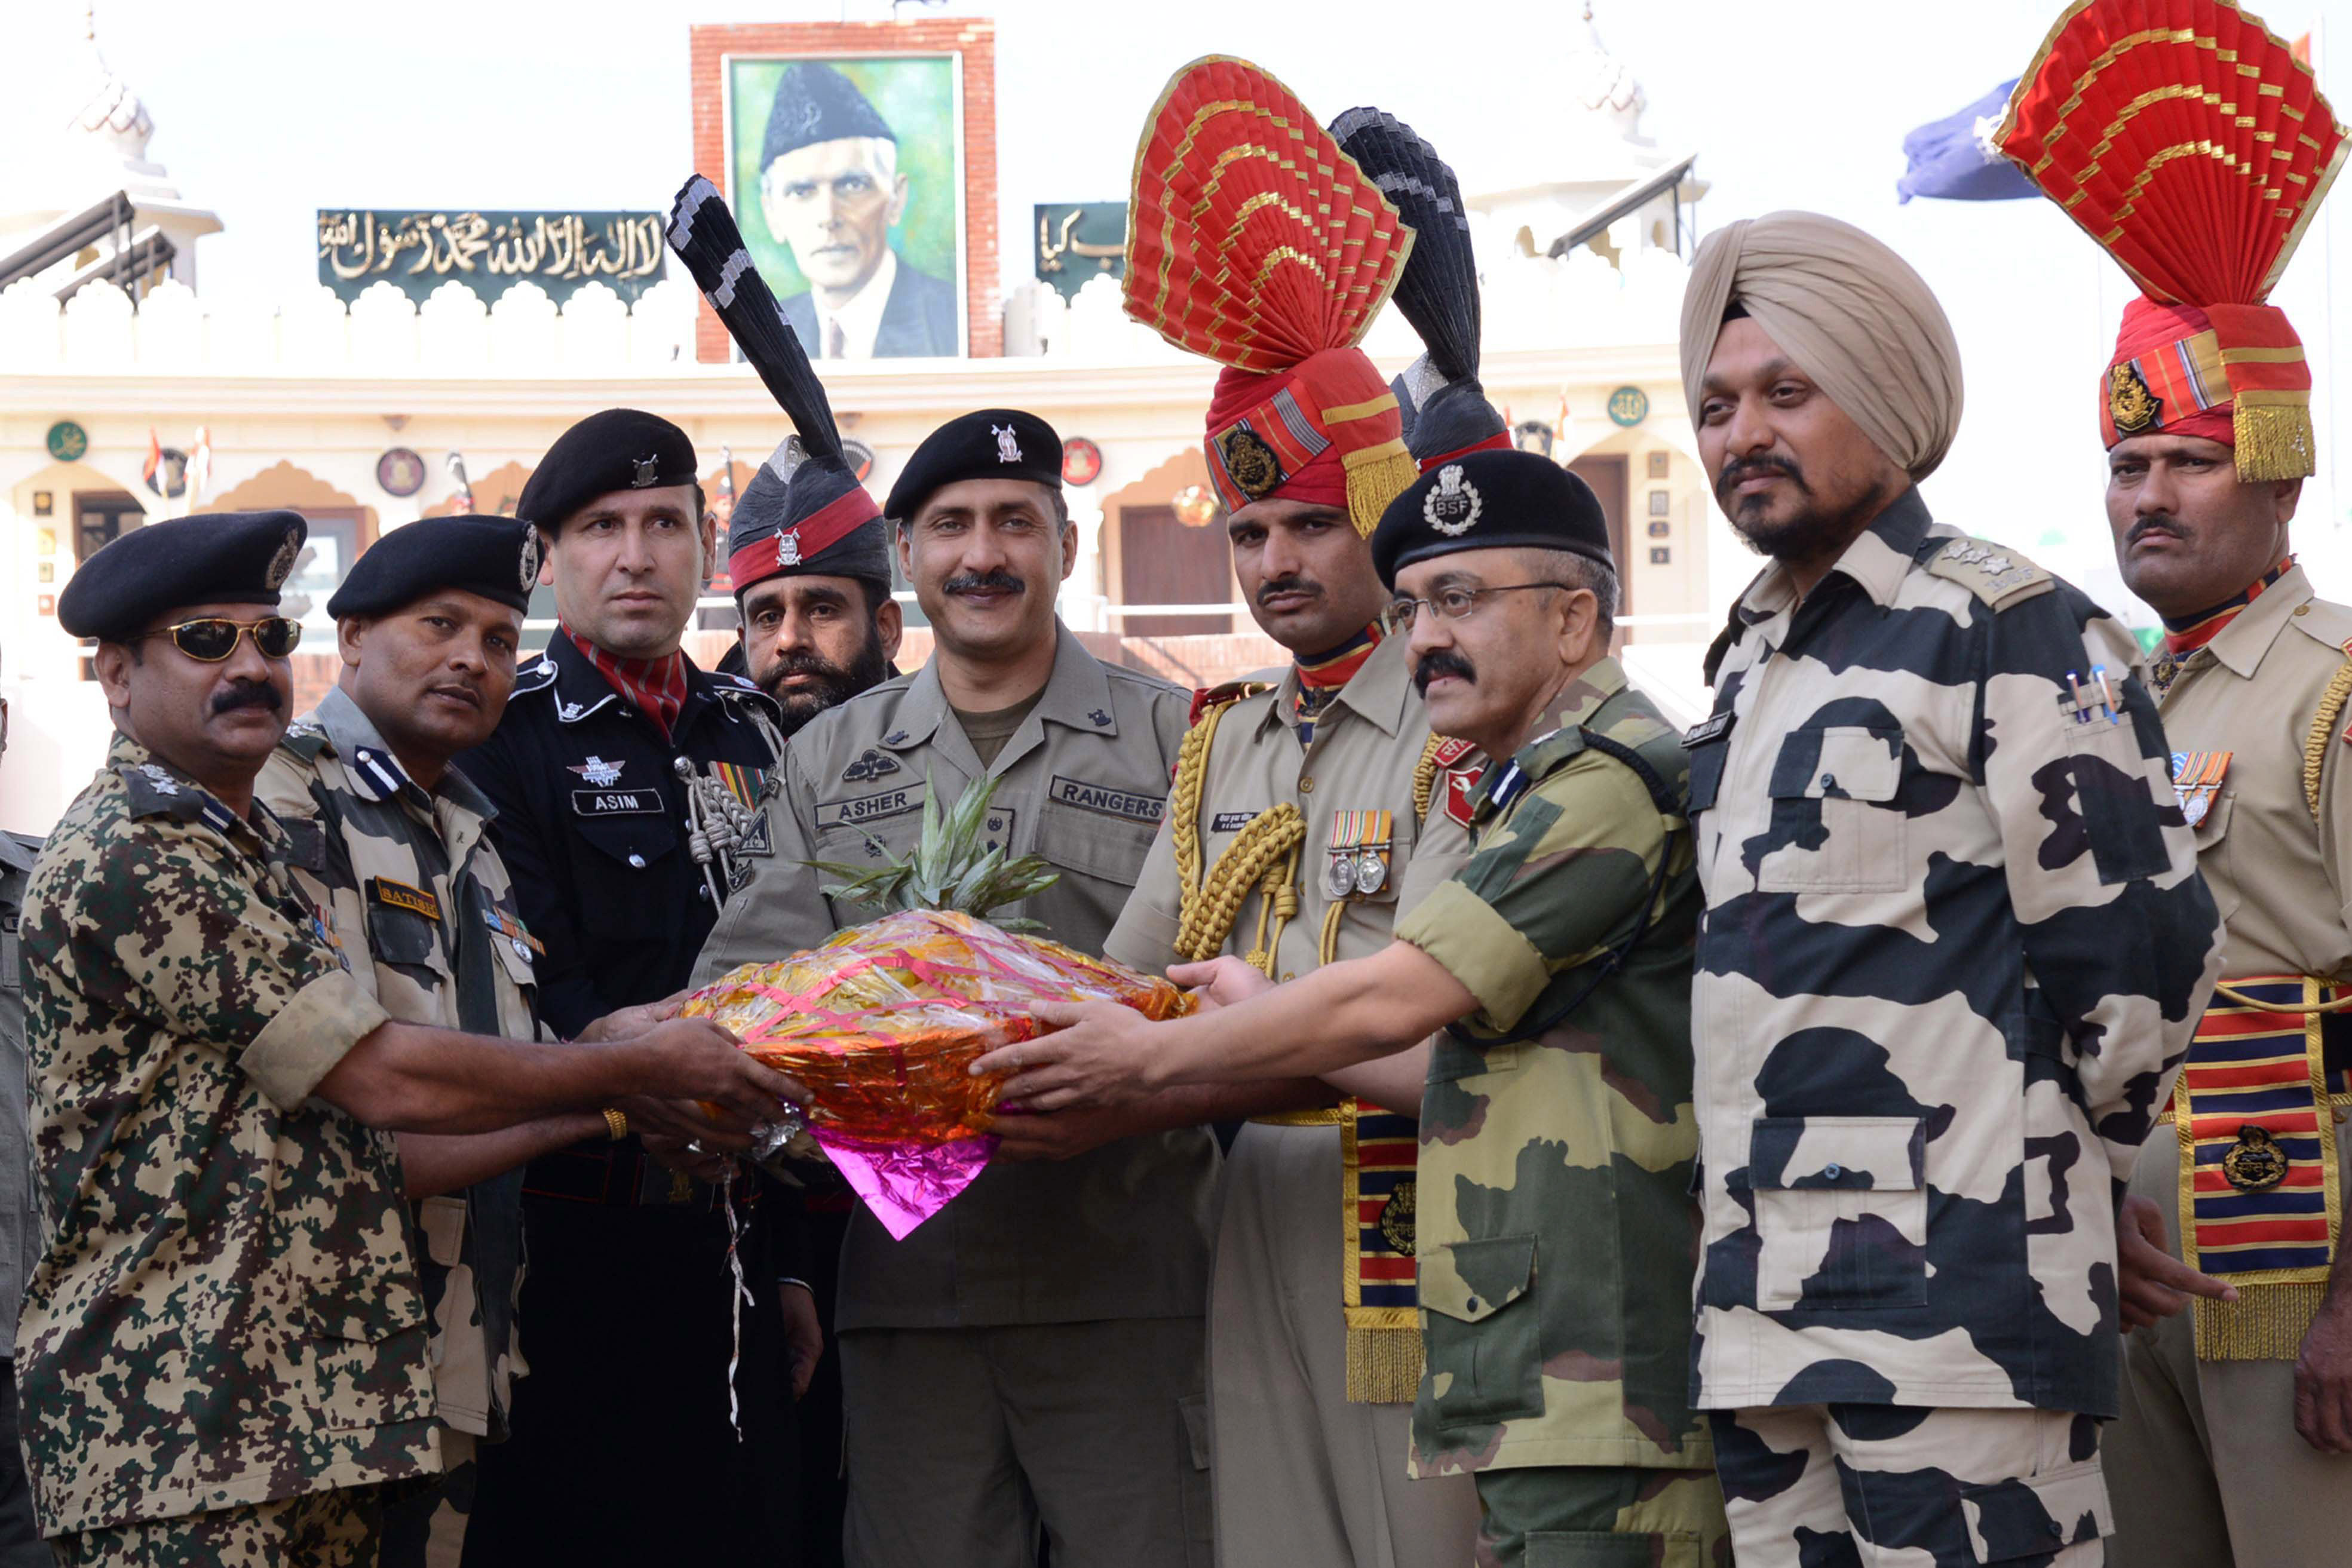 ndian border security force bsf officiating deputy inspector general dig baby joseph l bsf commandant satish kumar 2l along with bsf officers gives a gift to pakistani ranger wing commander asher khan c on diwali at the india pakistan wagah border on november 3 2013 photo afp